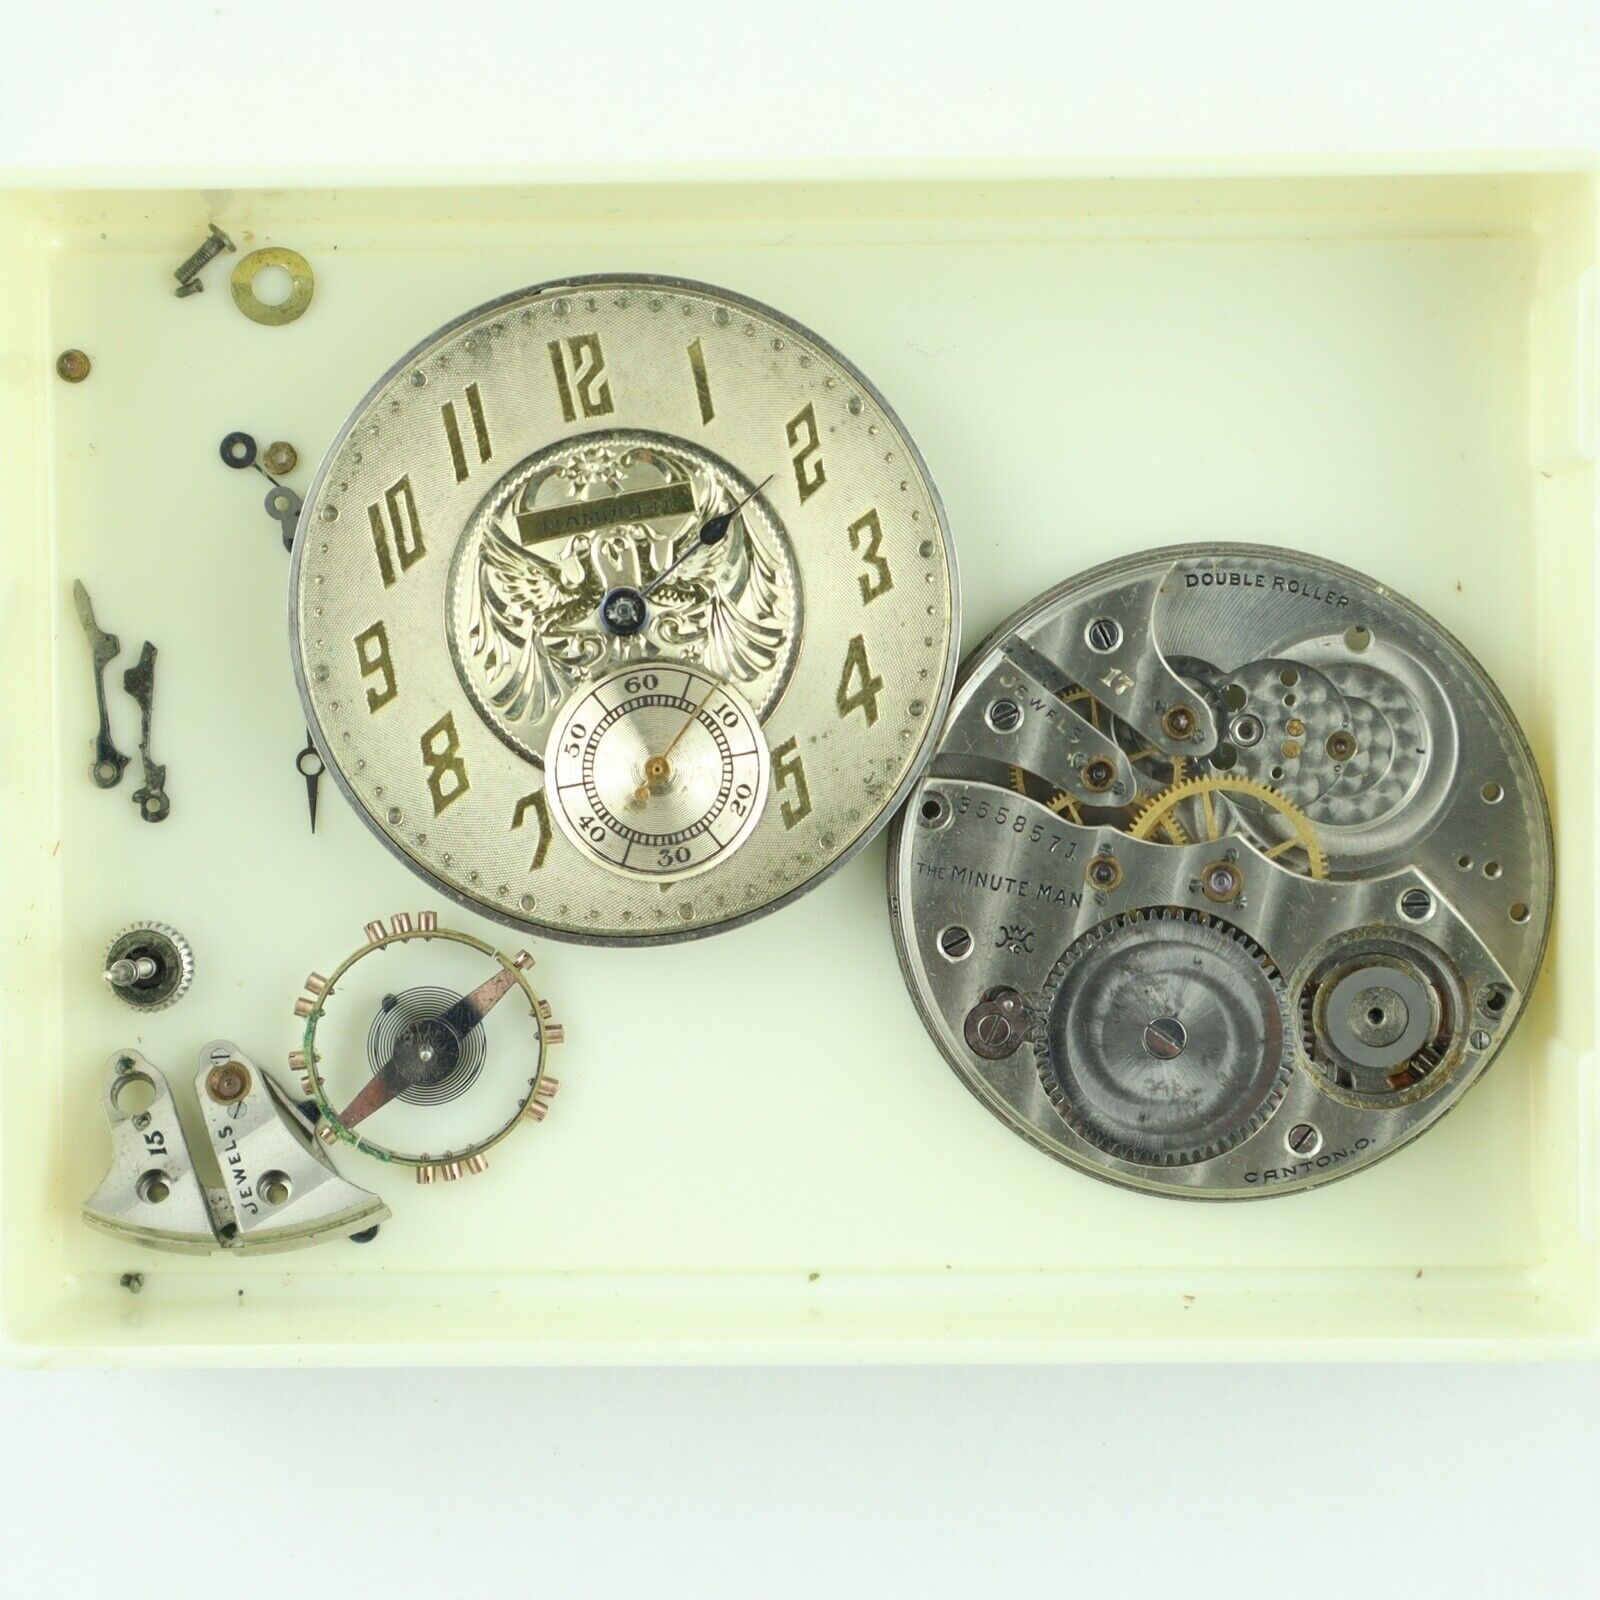 Antique Lot of 2 12S Hampden Nathan Hale & The Minute Man Pocket Watch Movement